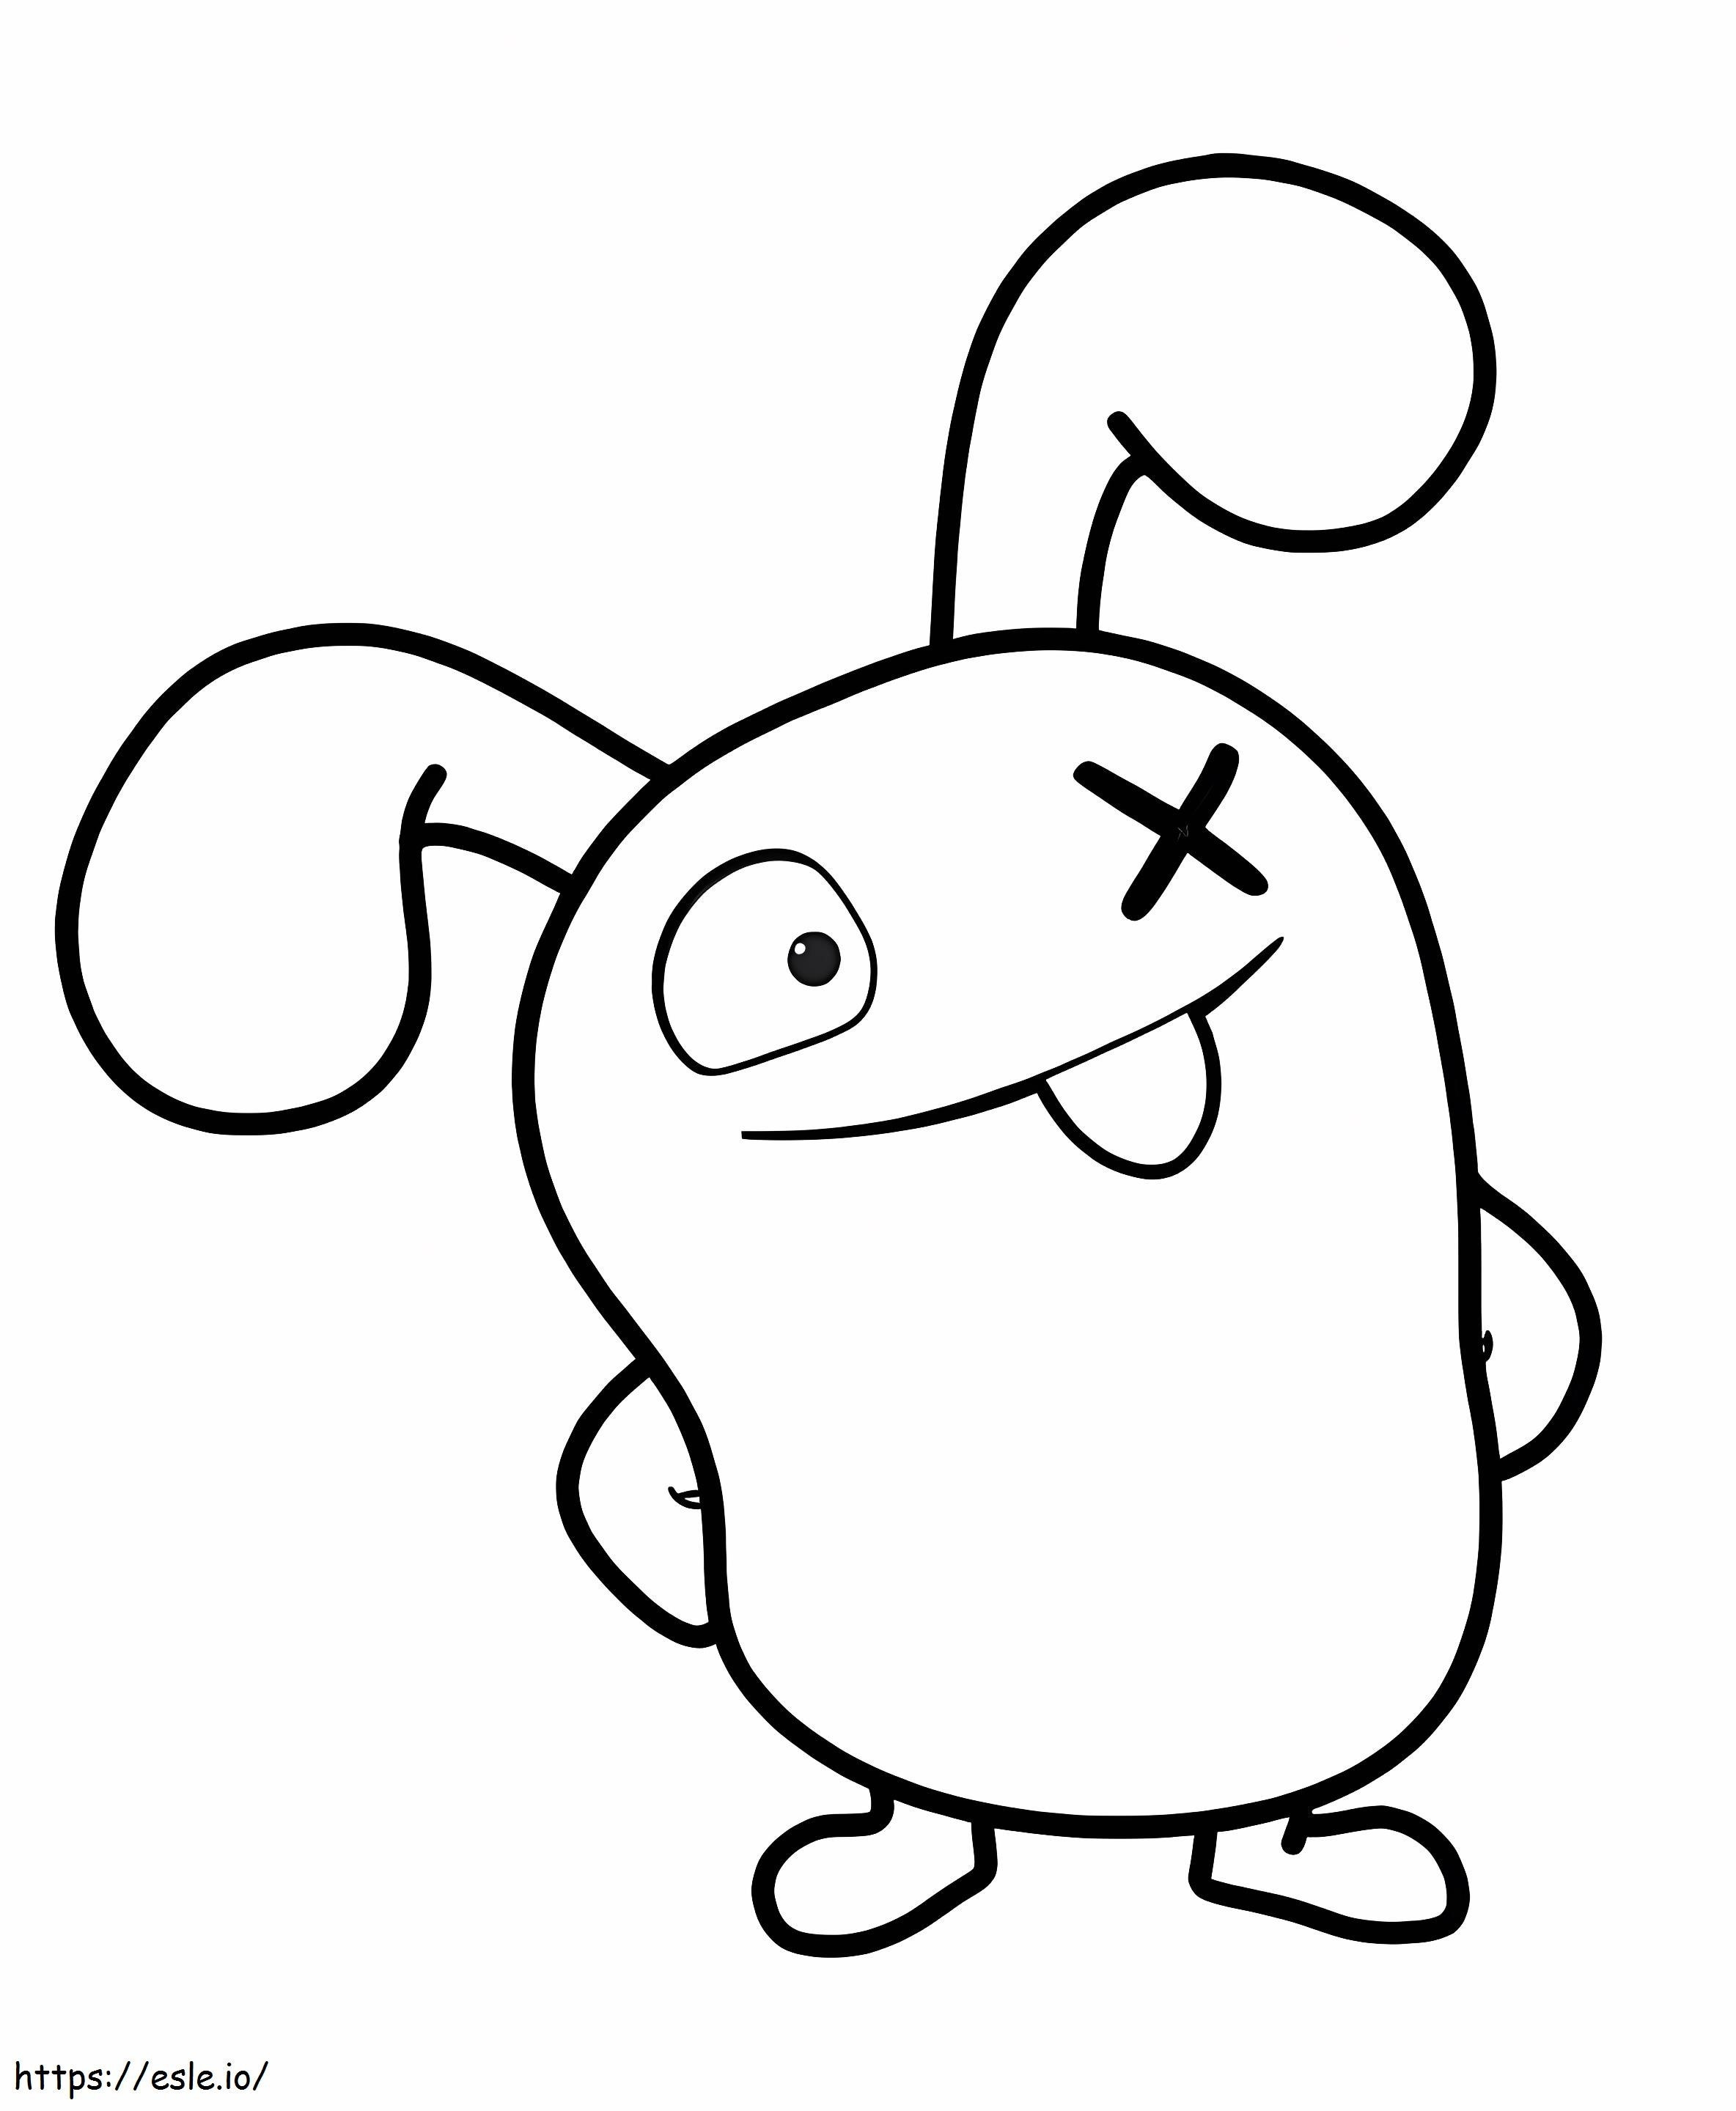 Ox From UglyDolls coloring page